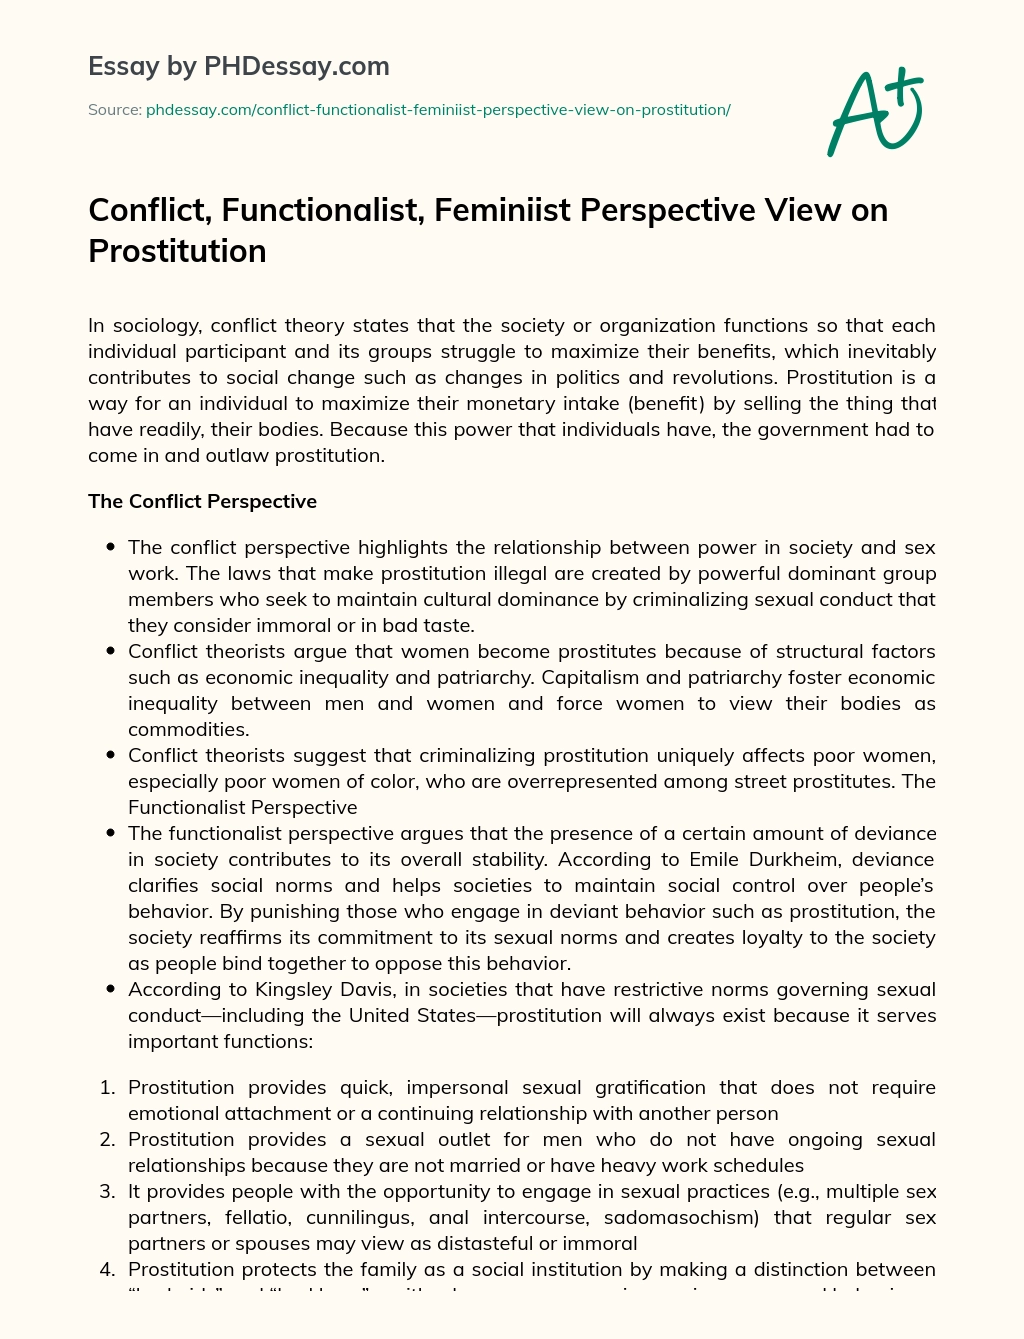 Conflict, Functionalist, Feminiist Perspective View on Prostitution essay